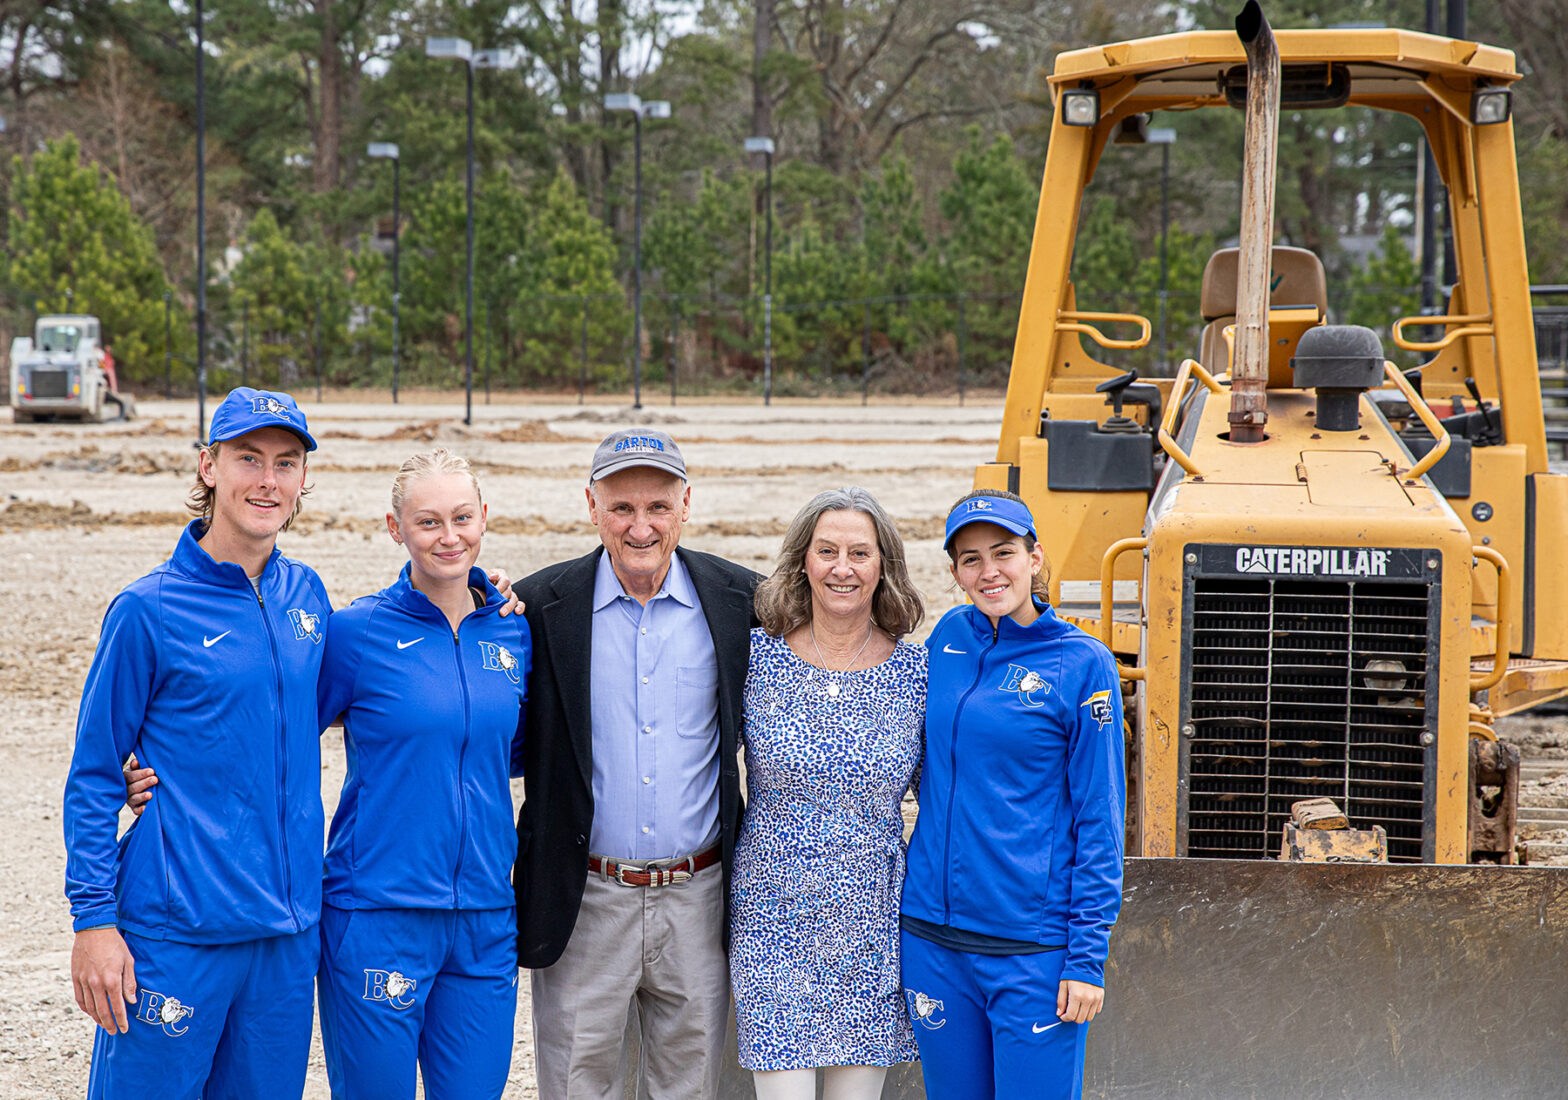 Featured image for post: New Michalak Tennis Center on the Horizon at Barton College